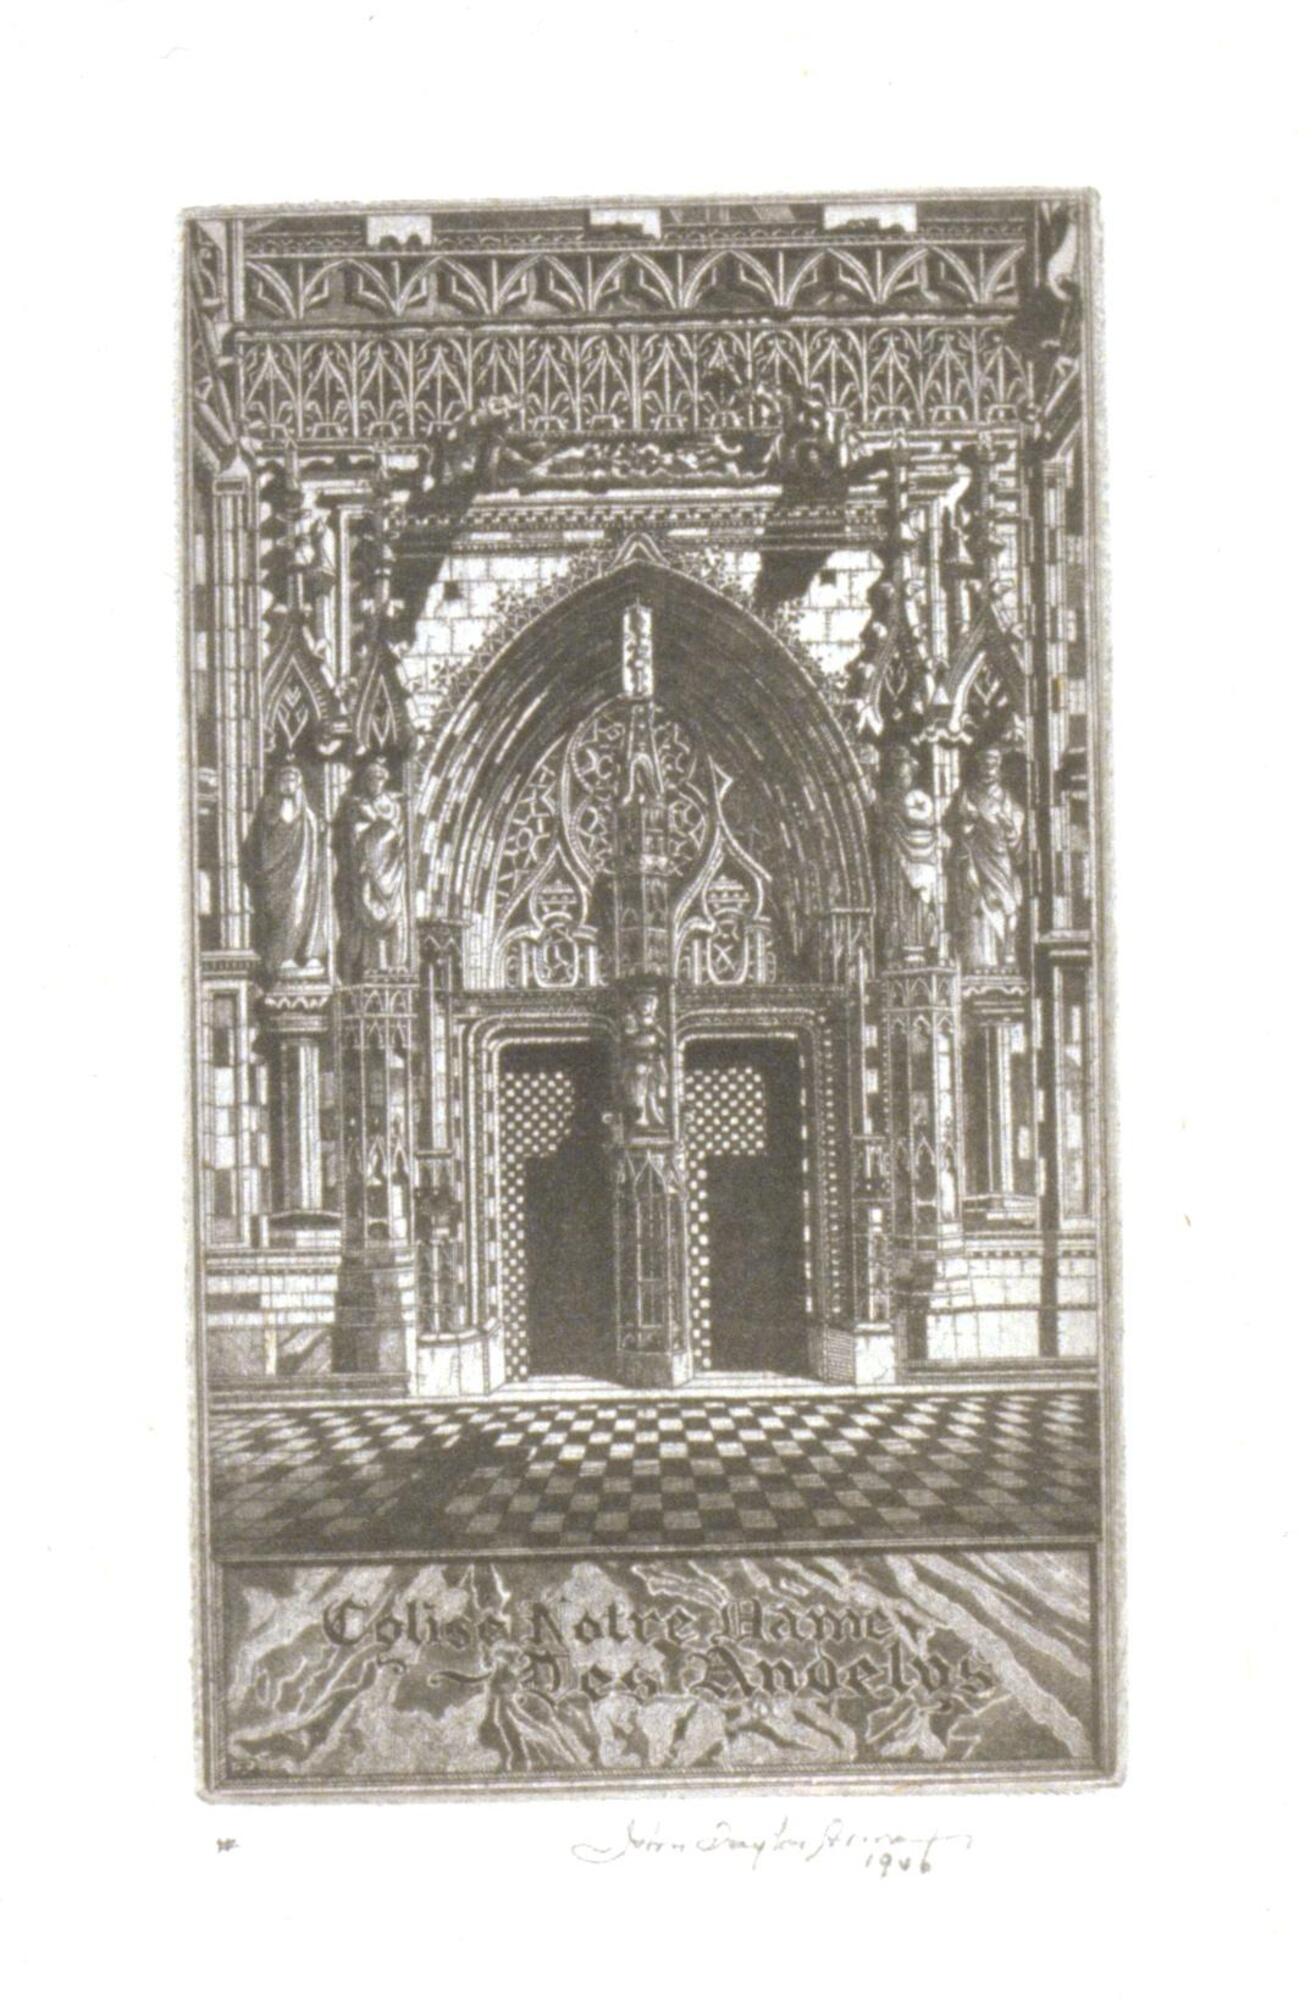 The vertical rectangular space of the image is completely filled with a detailed rendering of a section of an intricate Gothic portal façade. In the foreground a checked tile floor creates a recession into the space. In the center of the composition two doors are framed by a high, pointed arch. The space of the arch is filled with fine cut-out ornamental stonework. Arched niches containing figural sculptures flank each side of the main archway, and one also separates the two doors. The top of the image is framed by two rows of geometric ornamental decor. <br />
Beneath the image is an ornamental panel of simulated marble, on which the title of the image is written in gothic script: "Eglise Notre Dame / Les Andelys".<br />
Signed and dated: "John Taylor Arms / 1946"